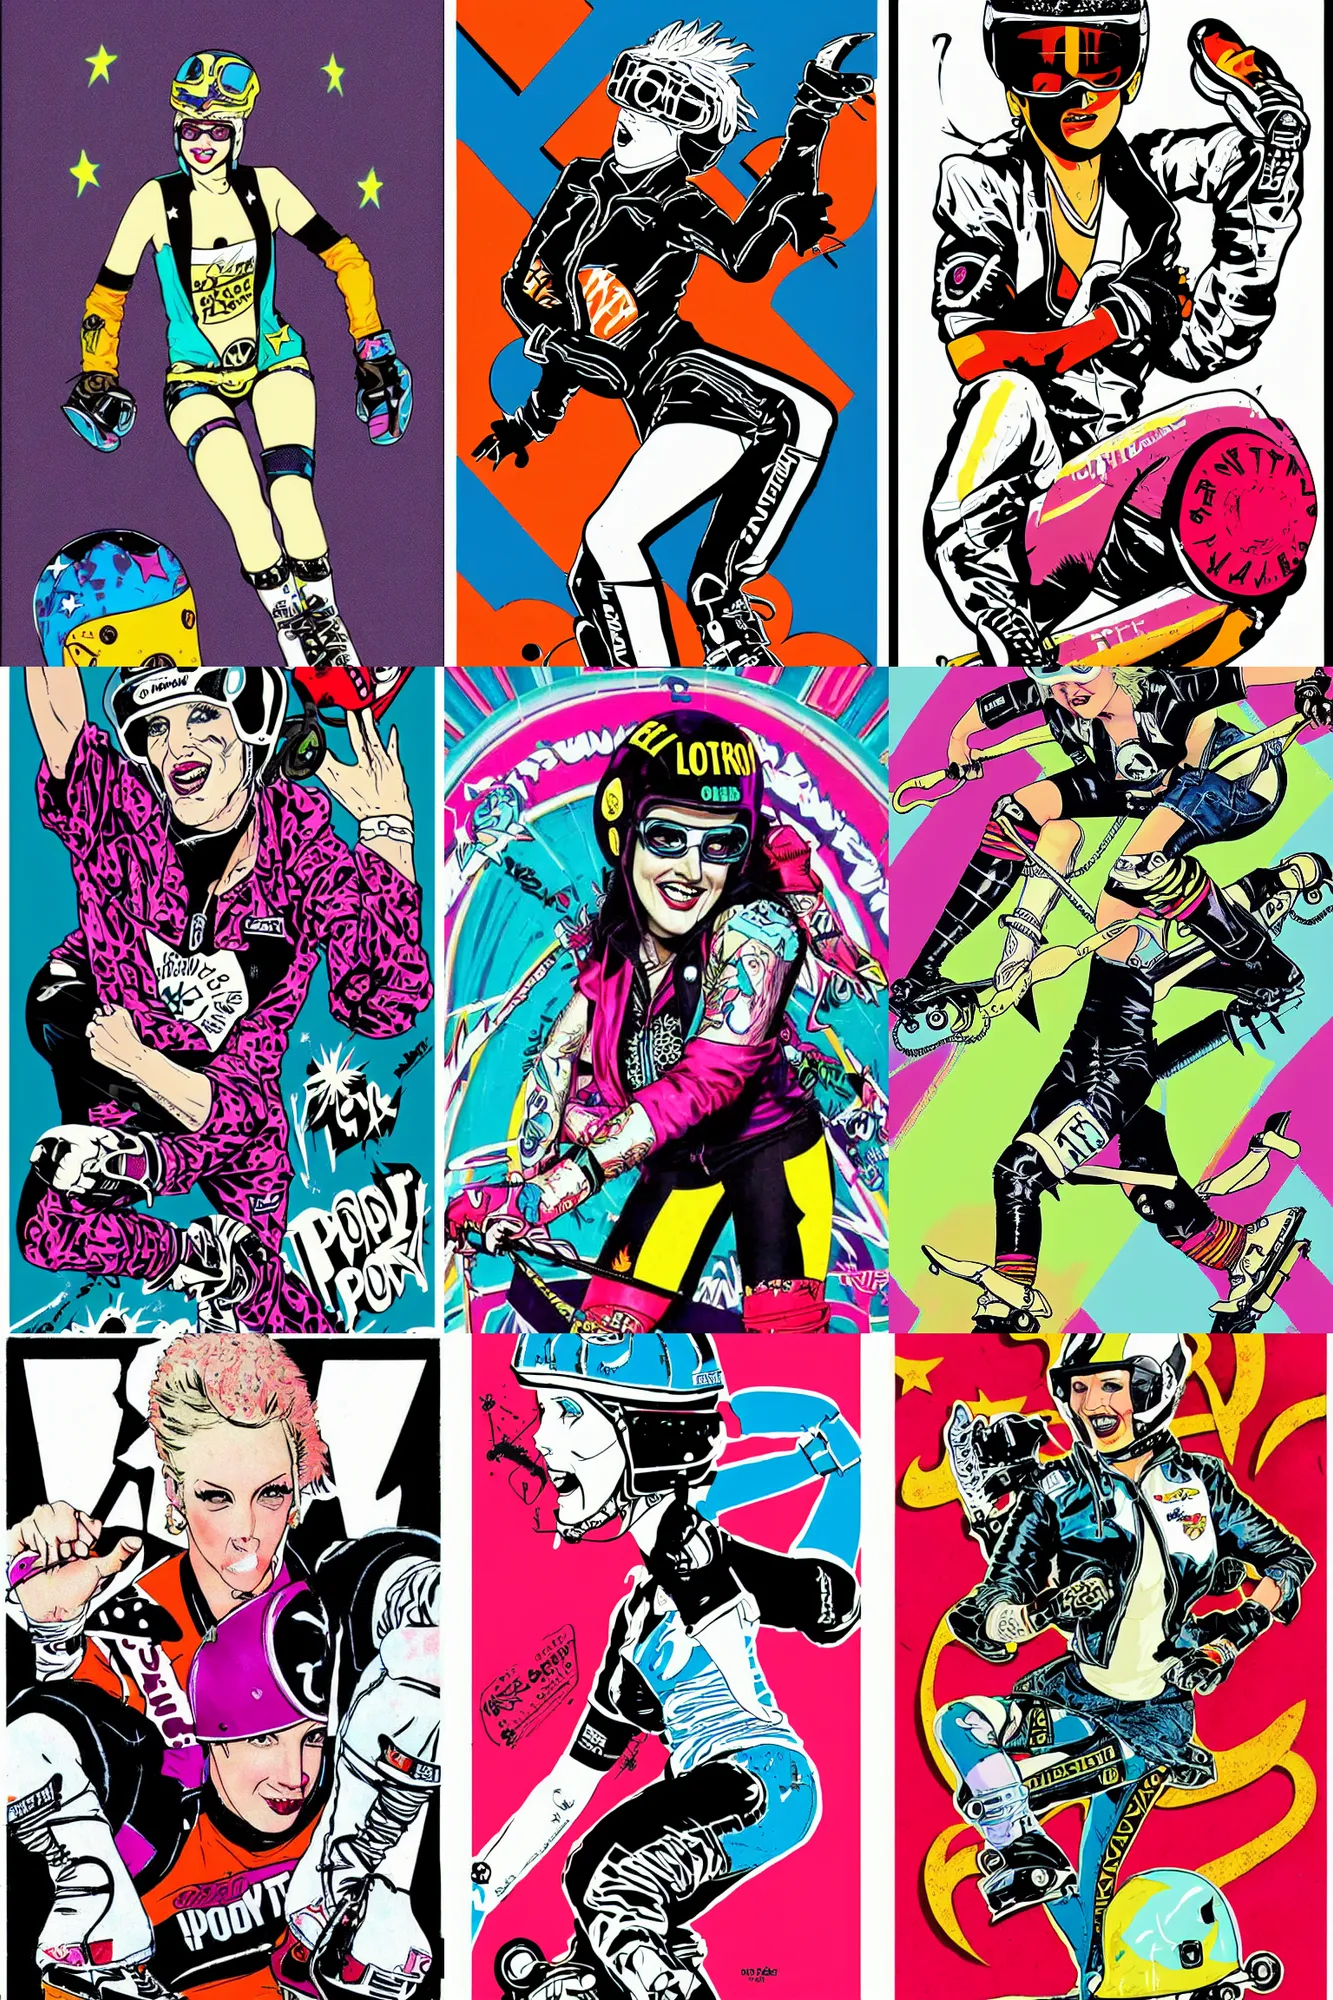 Prompt: Lori Petty as roller derby girl portrait, logo, wearing skating helmet, wearing knee and elbow pads, dynamic pose, Philippe Caza, 3 colour print